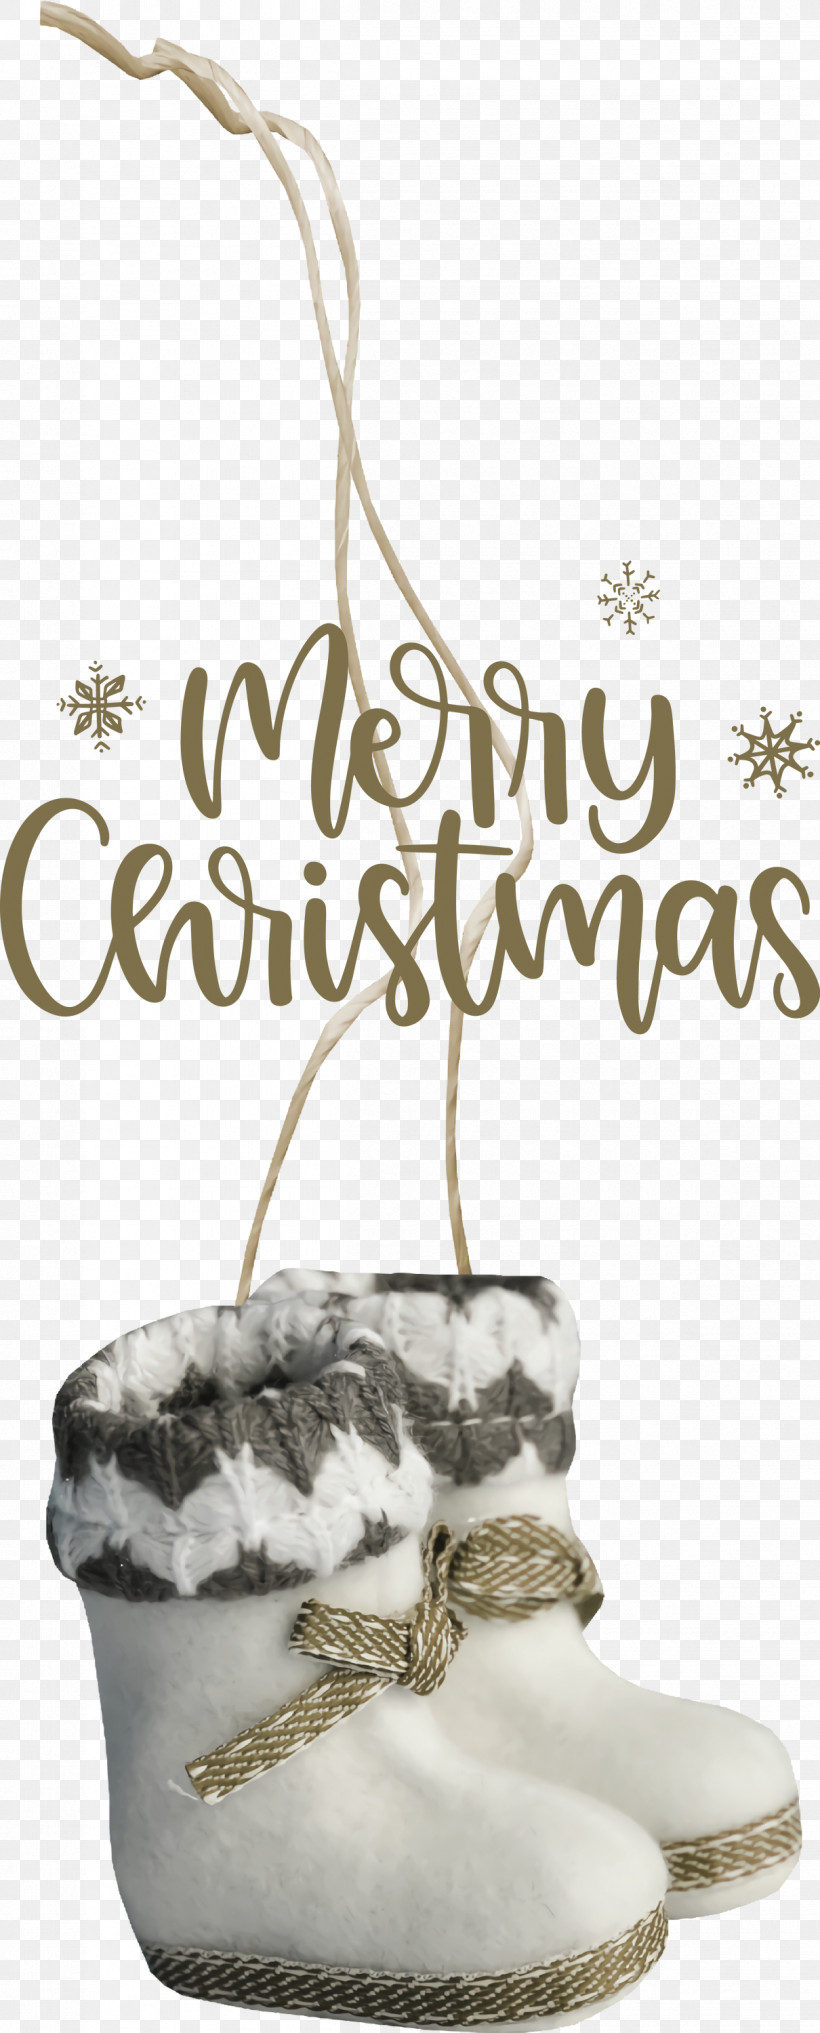 Merry Christmas Christmas Day Xmas, PNG, 1210x3000px, Merry Christmas, Christmas Day, Meter, Sandal, Xmas Download Free